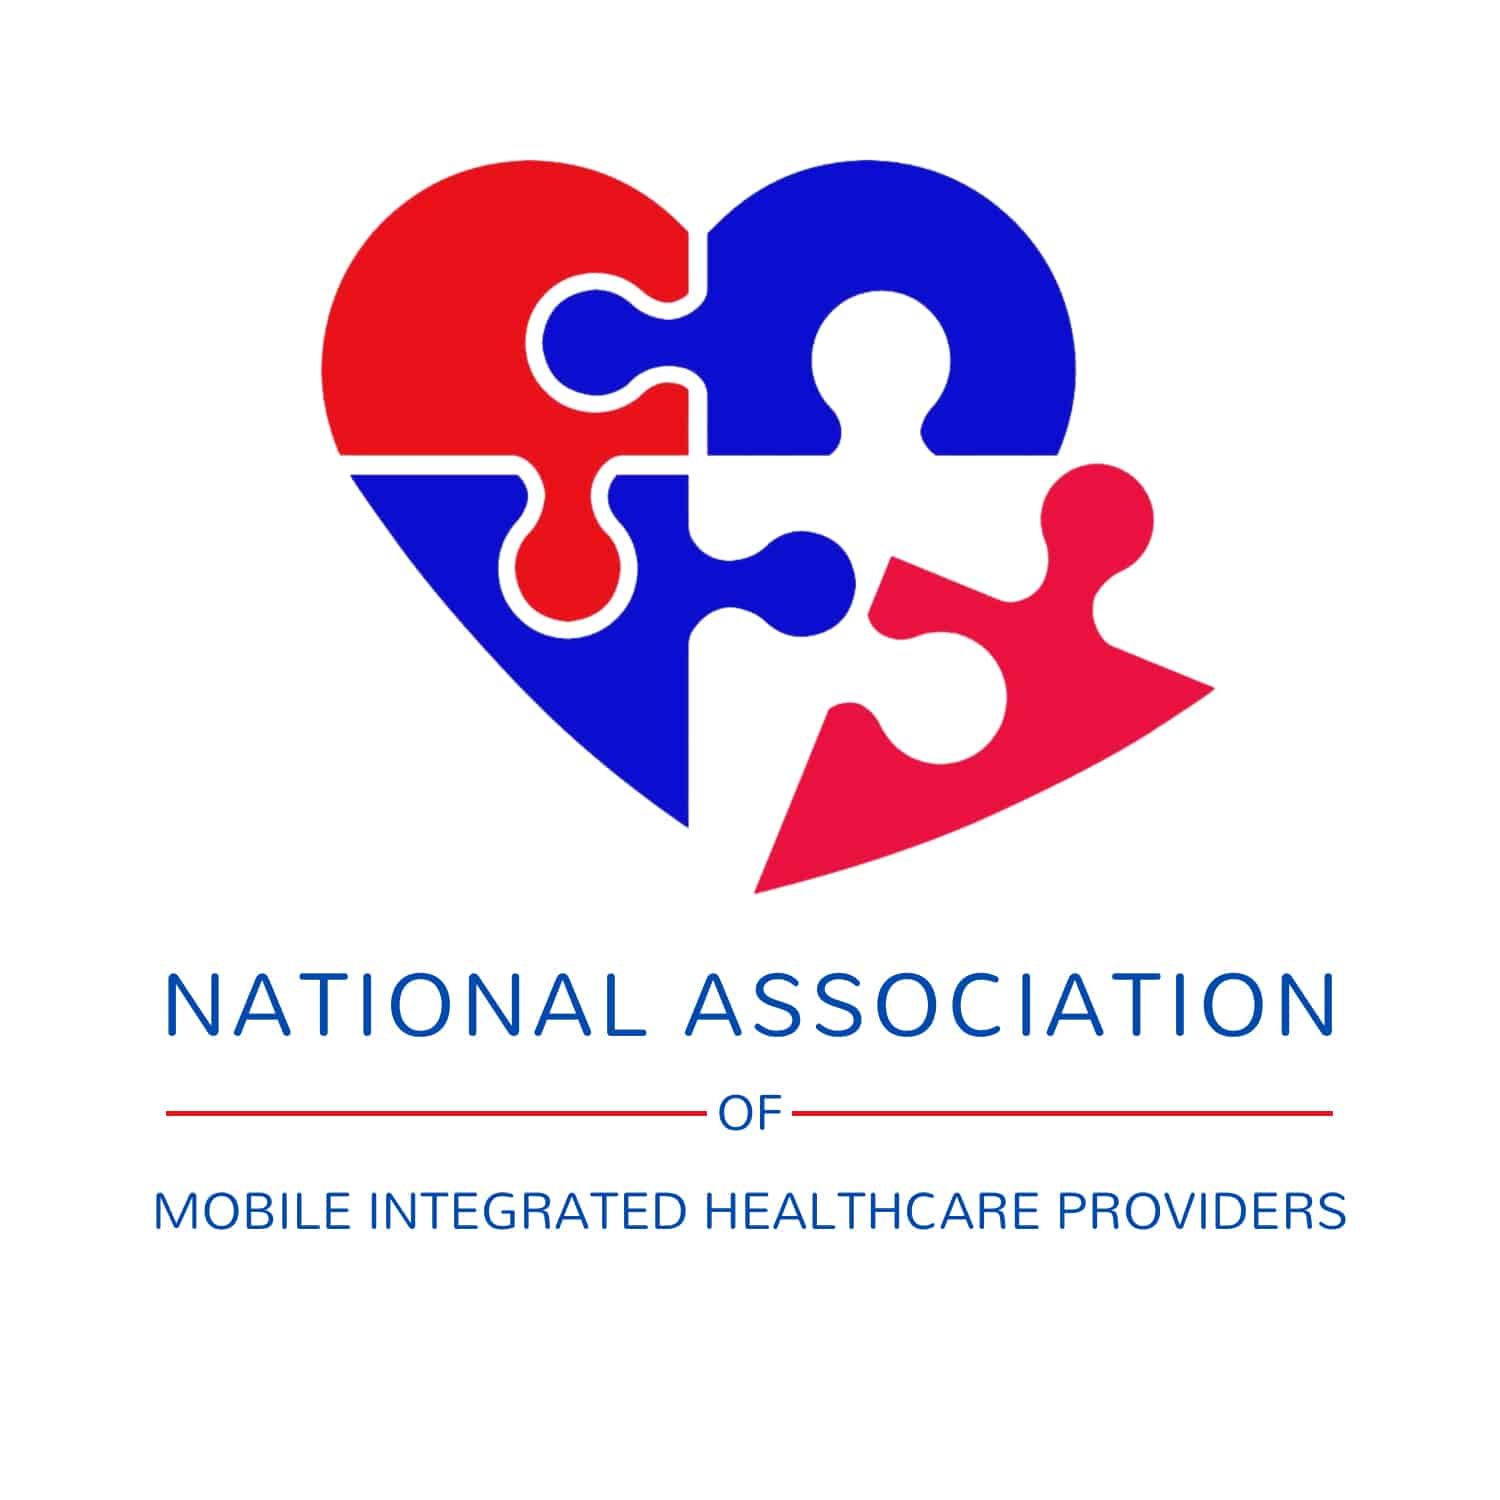 National Association of Mobile Integrated Healthcare Providers (NAMIHP)